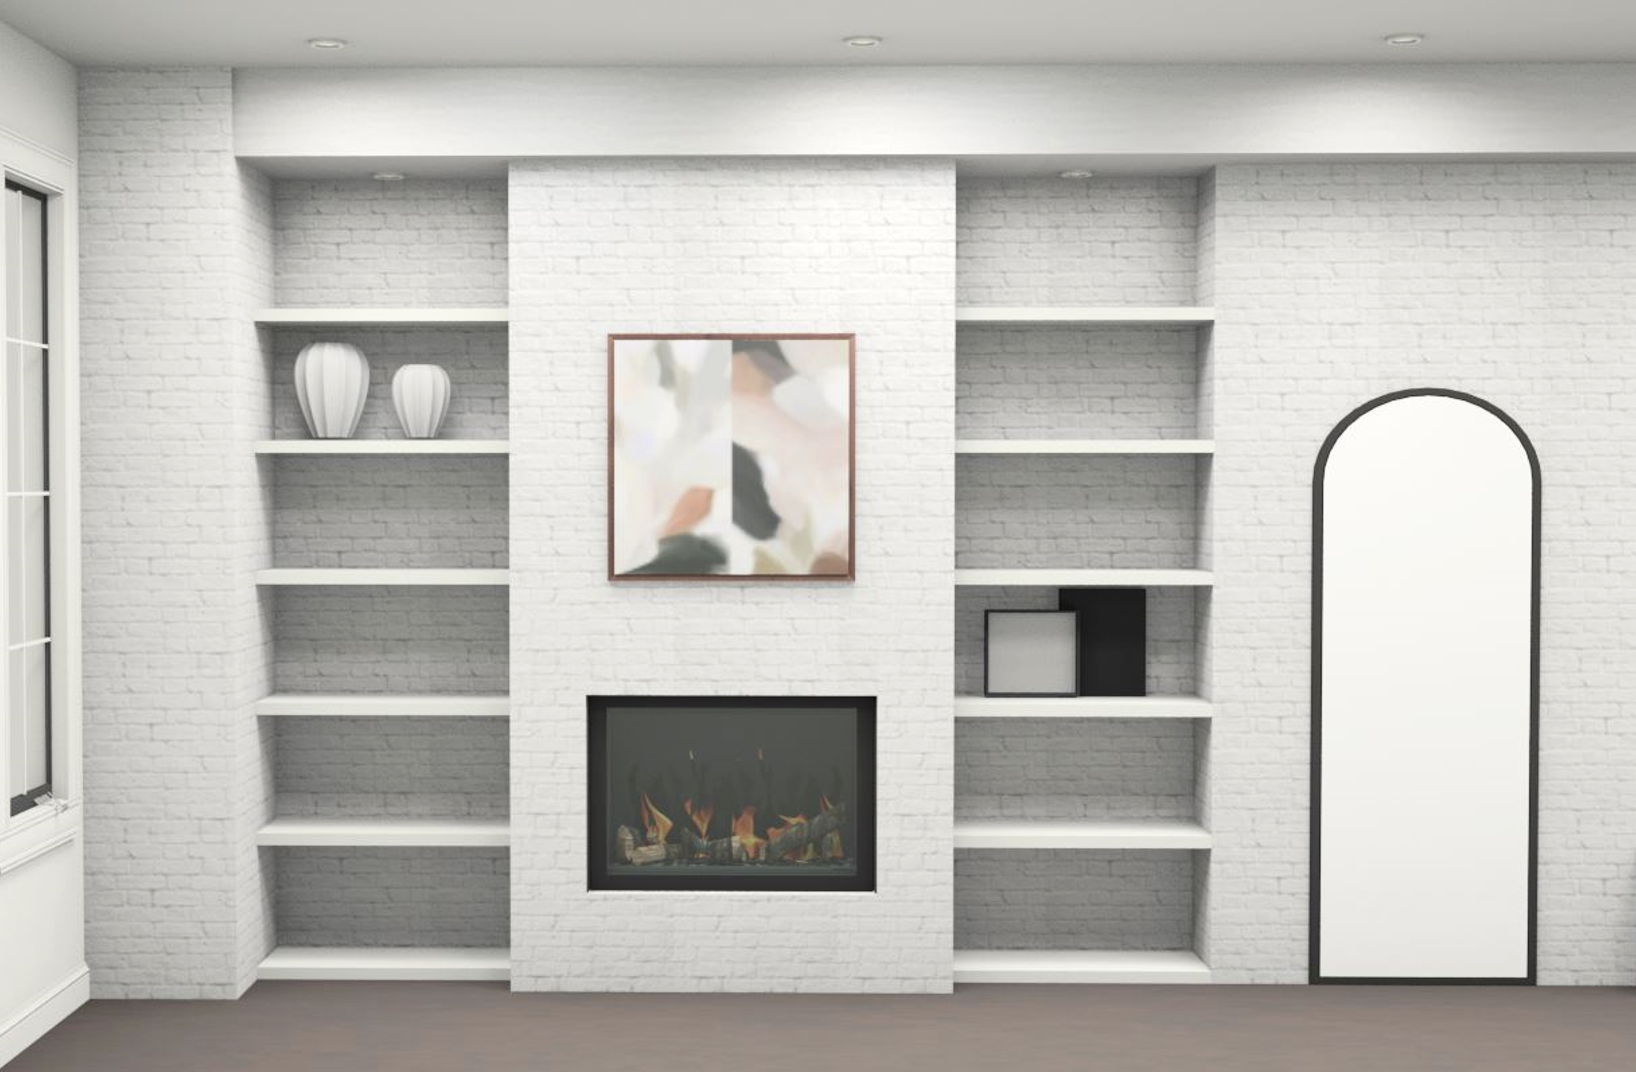 toronto interior design project living room rendering with fireplace and brick wall painted white